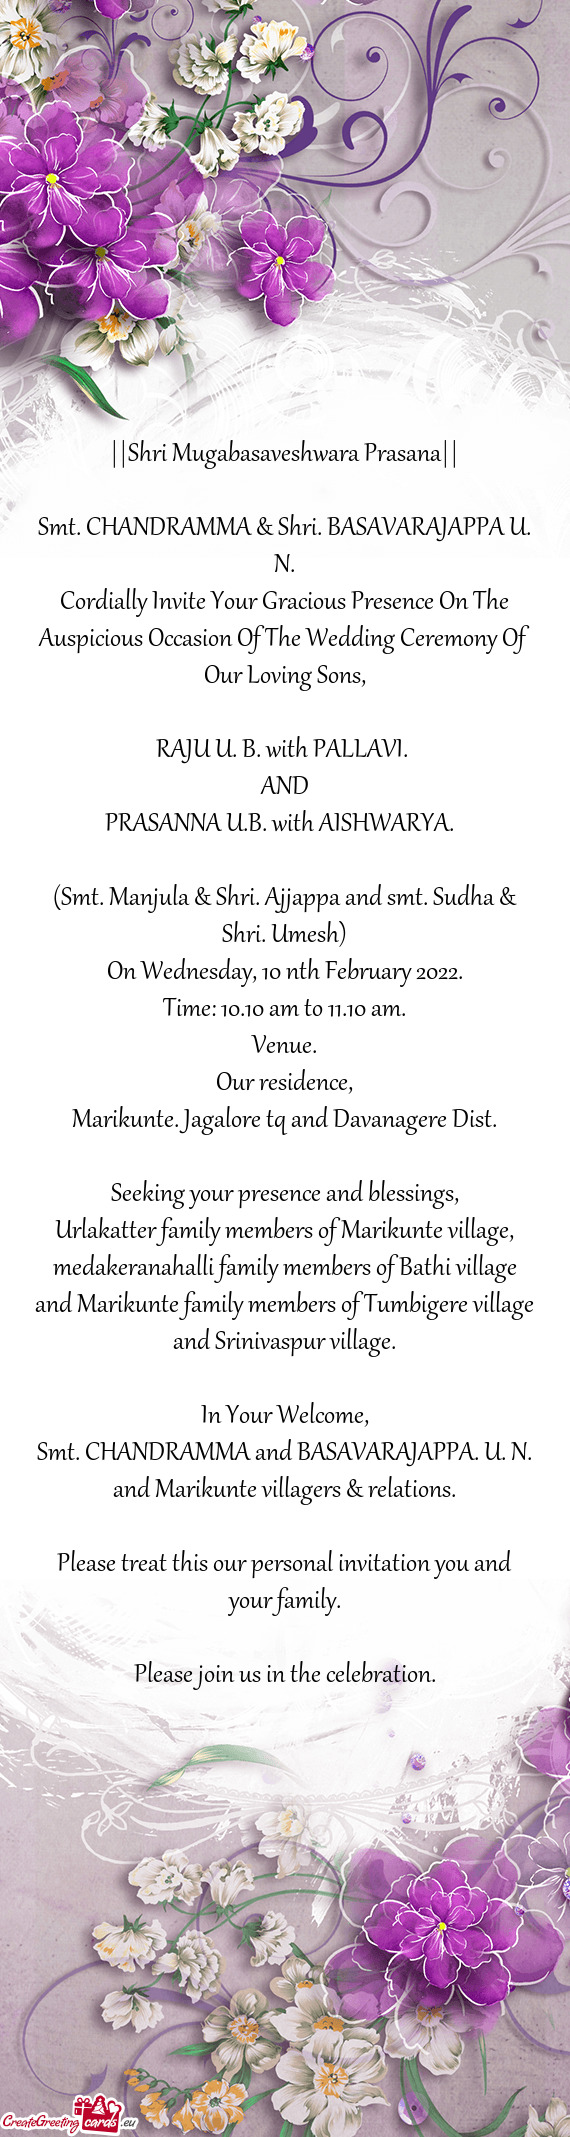 Cordially Invite Your Gracious Presence On The Auspicious Occasion Of The Wedding Ceremony Of Our Lo